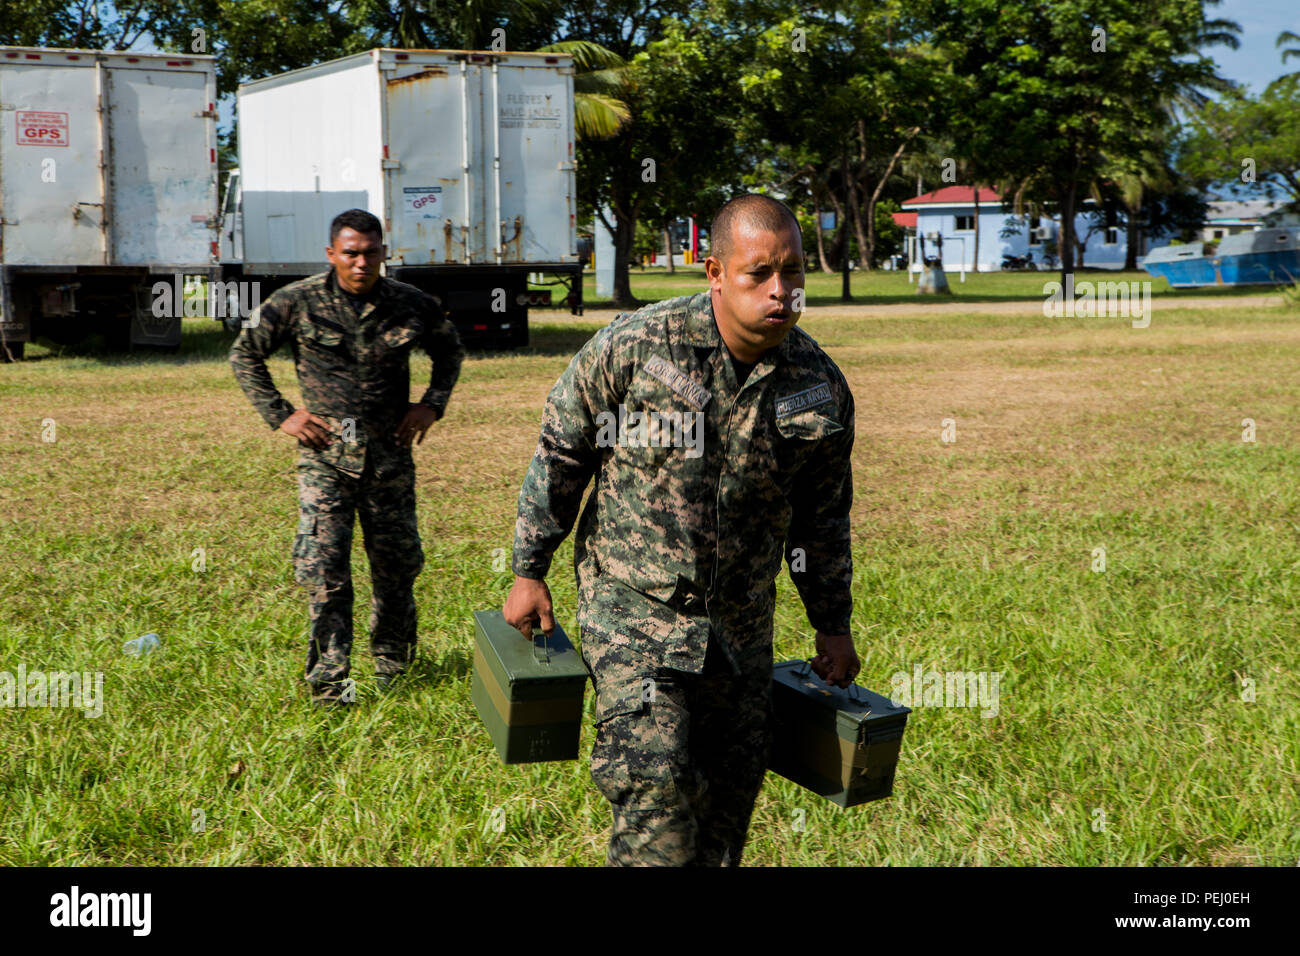 A Honduran marine runs with ammo cans during the maneuver under fire portion of the combat fitness test at Naval Base Puerto Castilla, Honduras, Aug. 12, 2015. U.S. Marines with Security Cooperation Team-Honduras, Special Purpose Marine Air-Ground Task Force-Southern Command monitored the event. SCT-Honduras is currently deployed as part of the SPMAGTF-SC to assist the Centro de Adiestramiento Naval with implementing a training curriculum to create a Honduran marine Program.  (U.S. Marine Corps Photo by Cpl. Katelyn Hunter/Released). Stock Photo